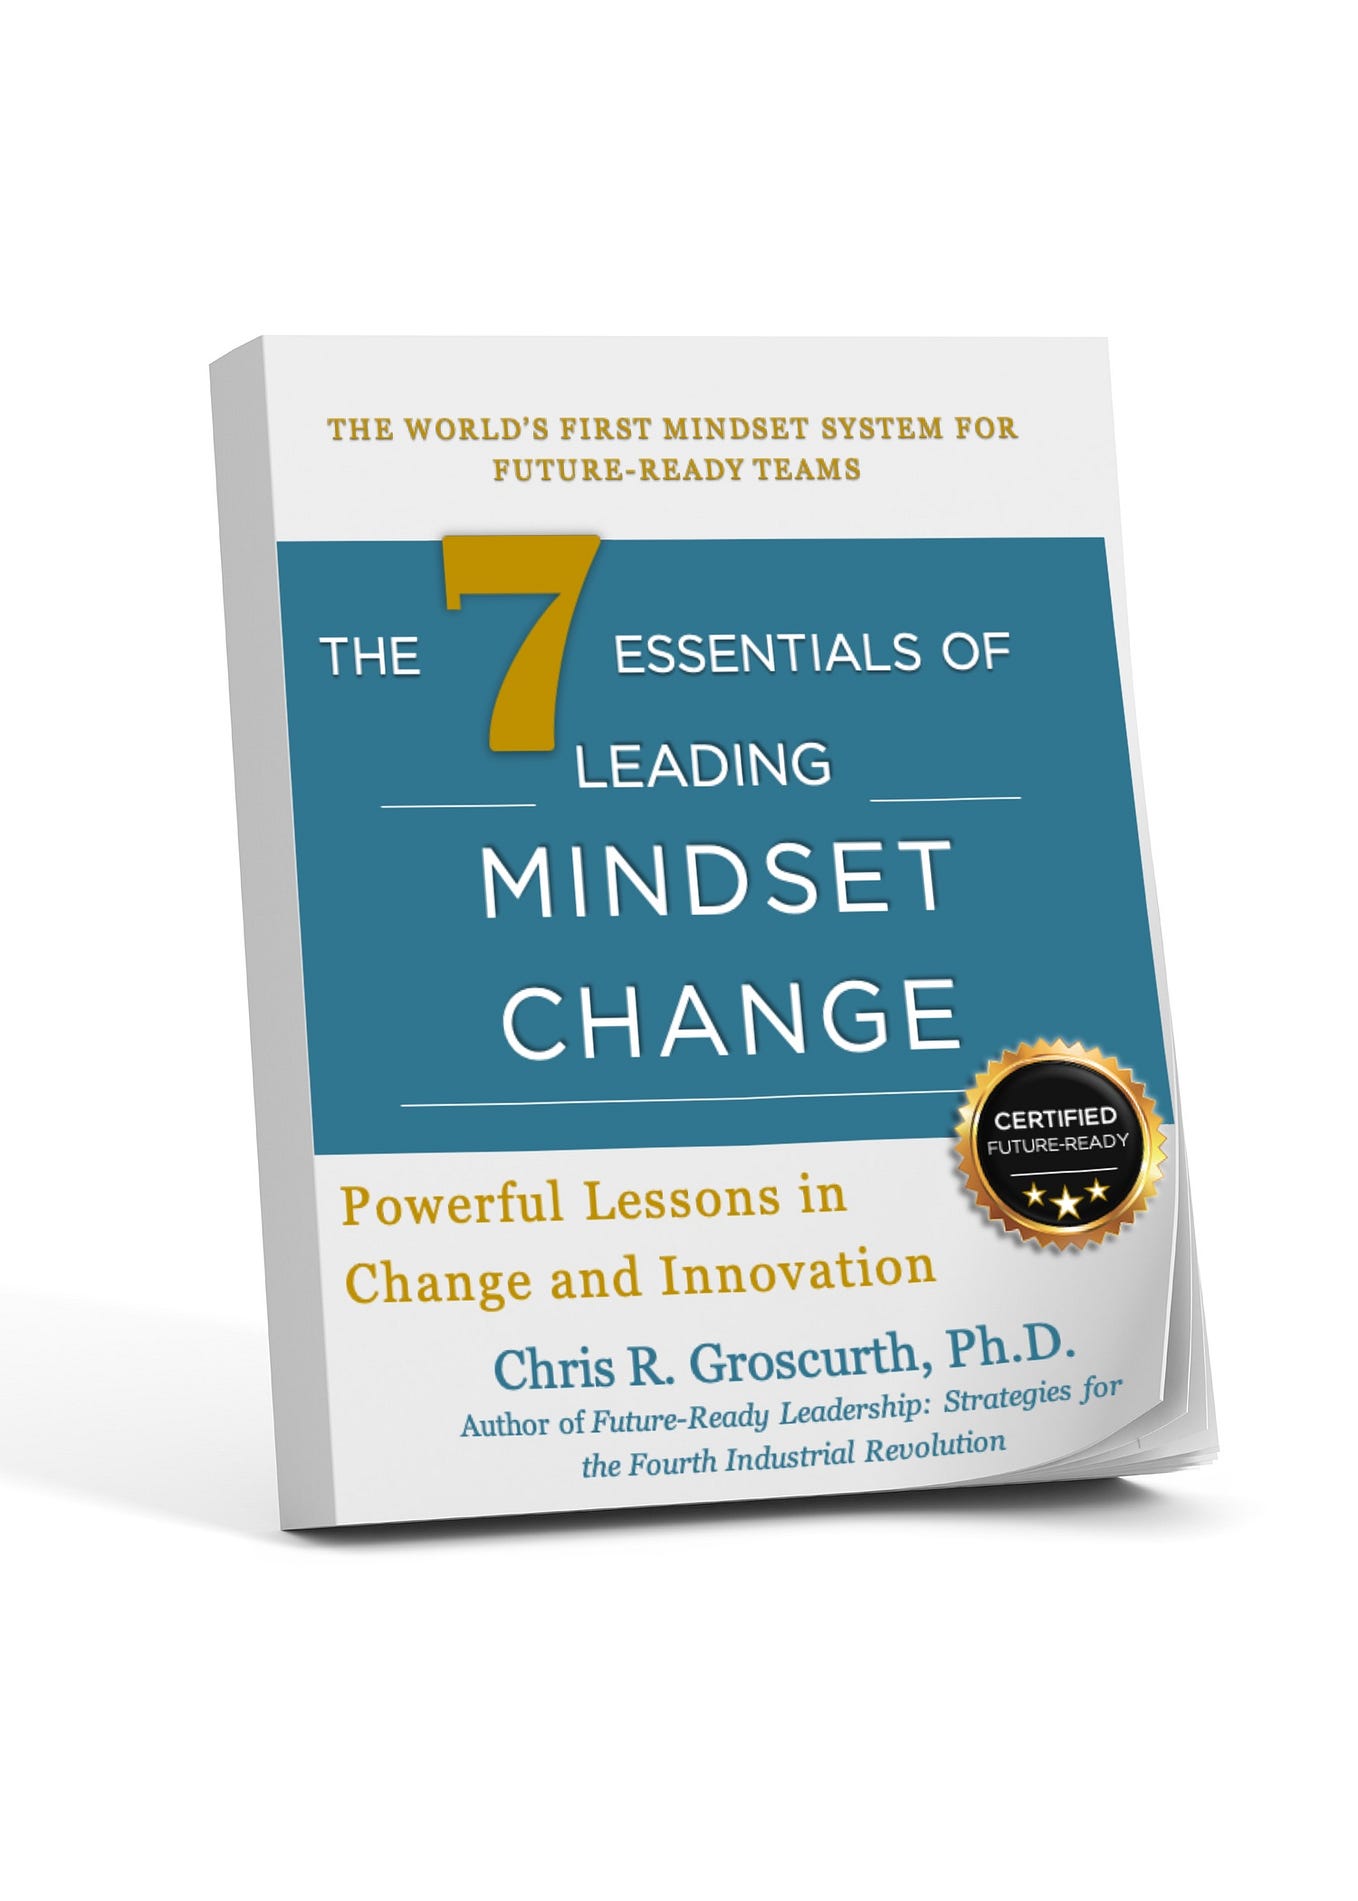 Five Dysfunctional Mindsets that Future-Ready Leaders Avoid